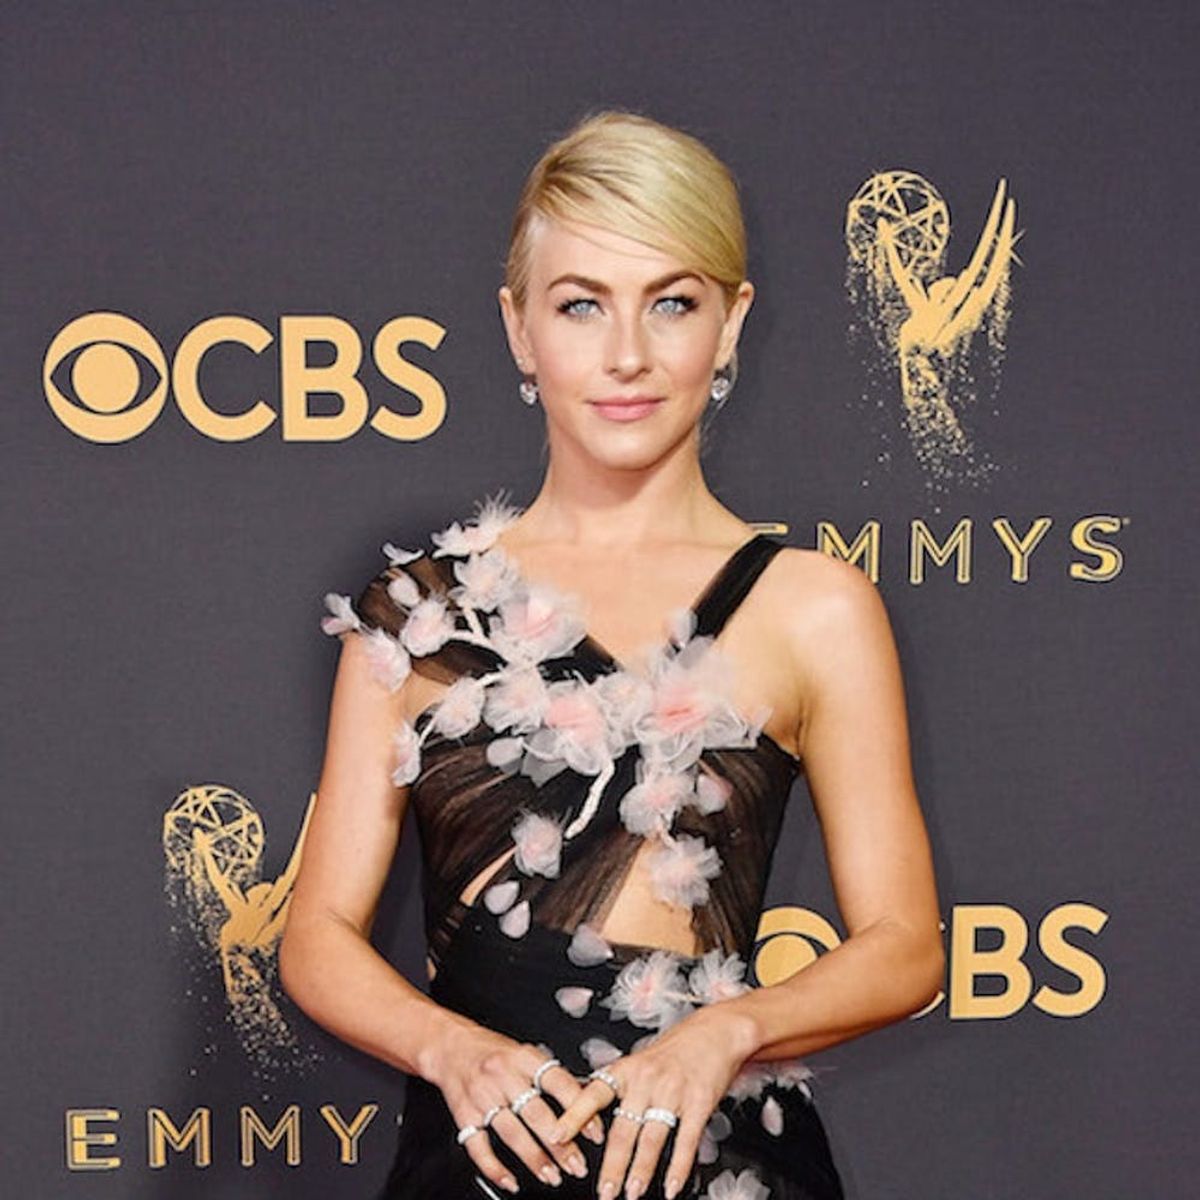 Emmys 2017 Red Carpet: All the Must-See Celebrity Style